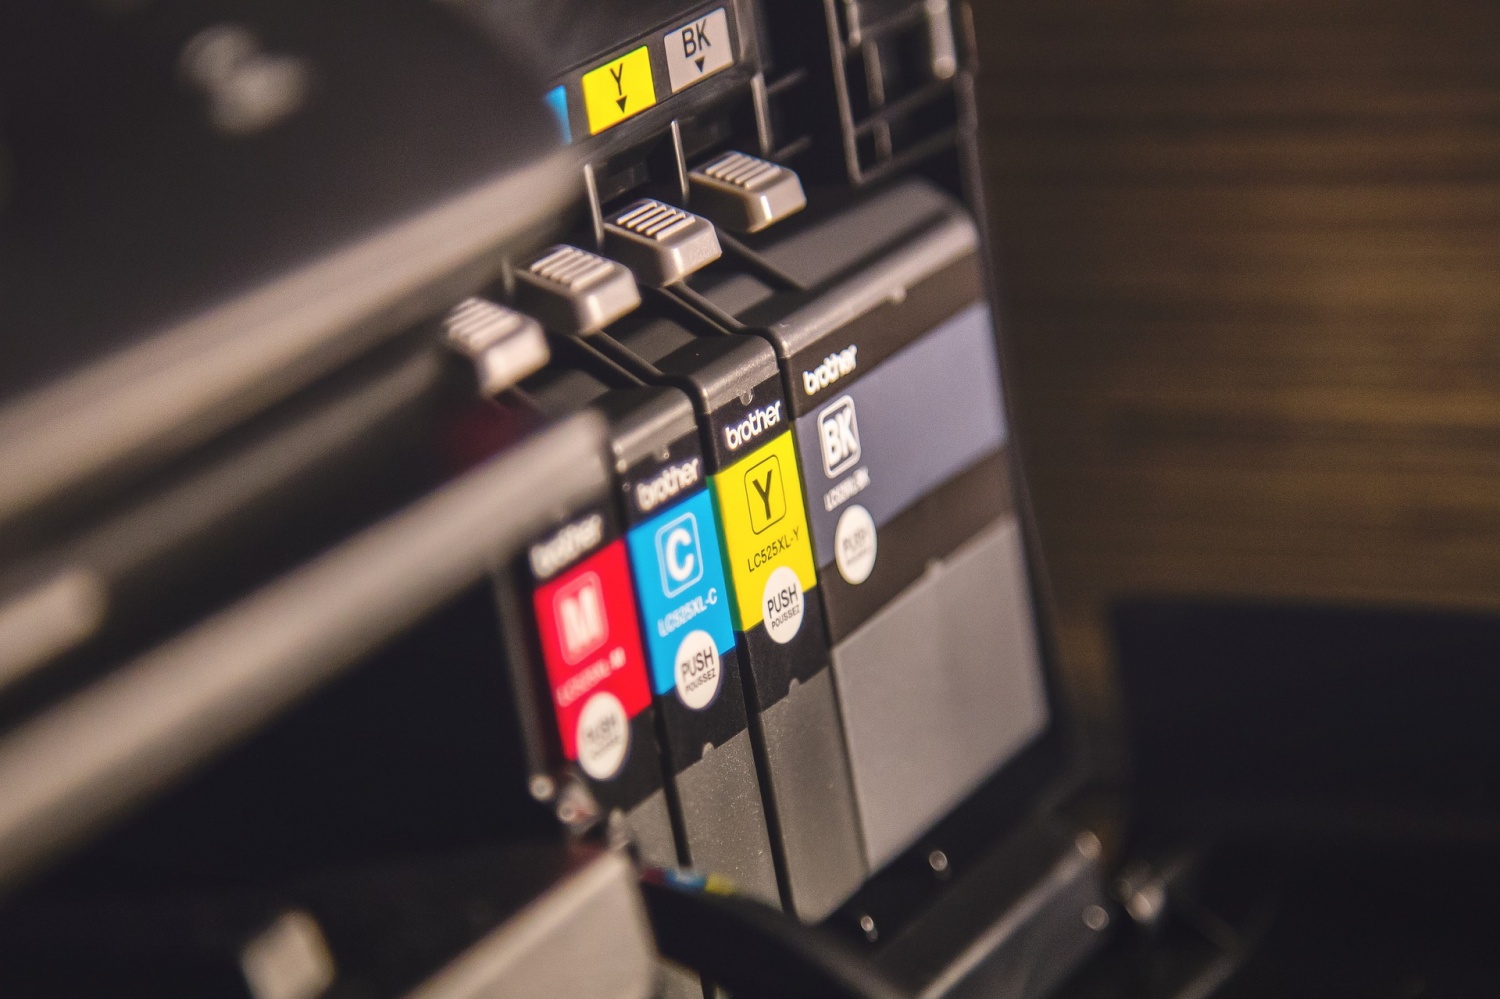 Design Features to Keep in Mind When Choosing a Business Printer